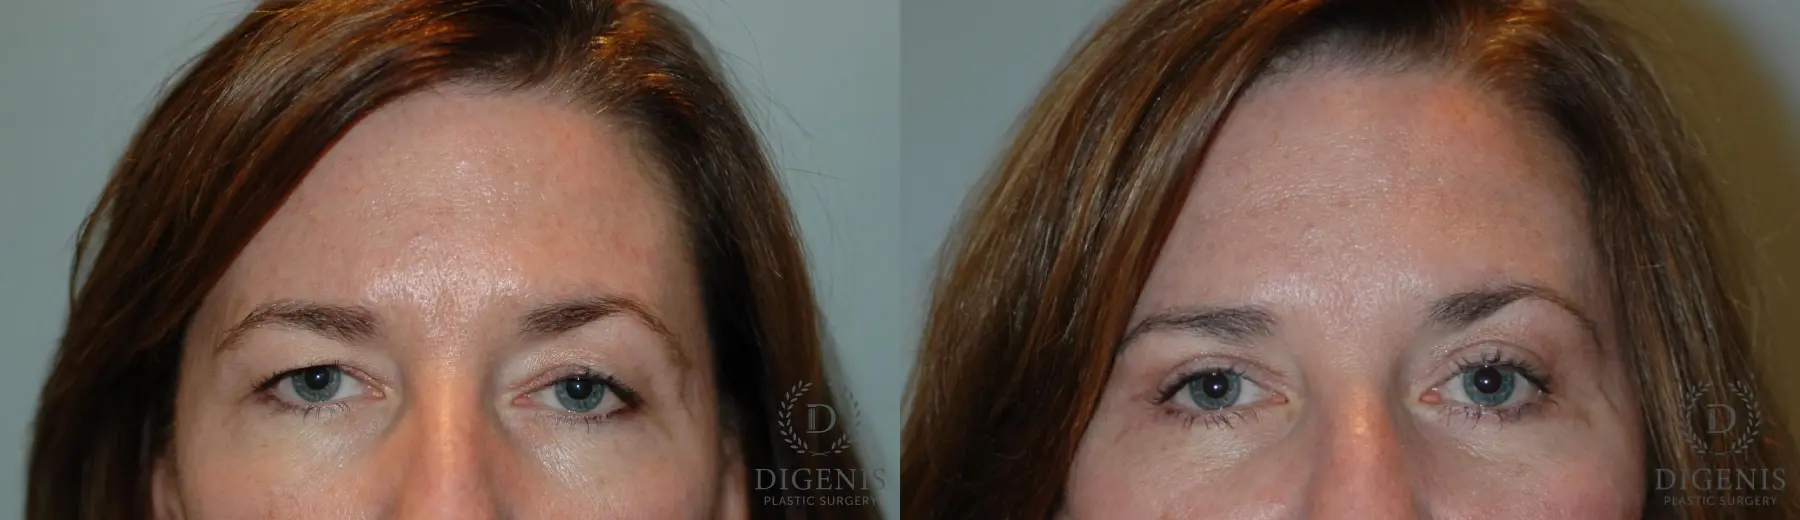 Eyelid Surgery: Patient 3 - Before and After 1